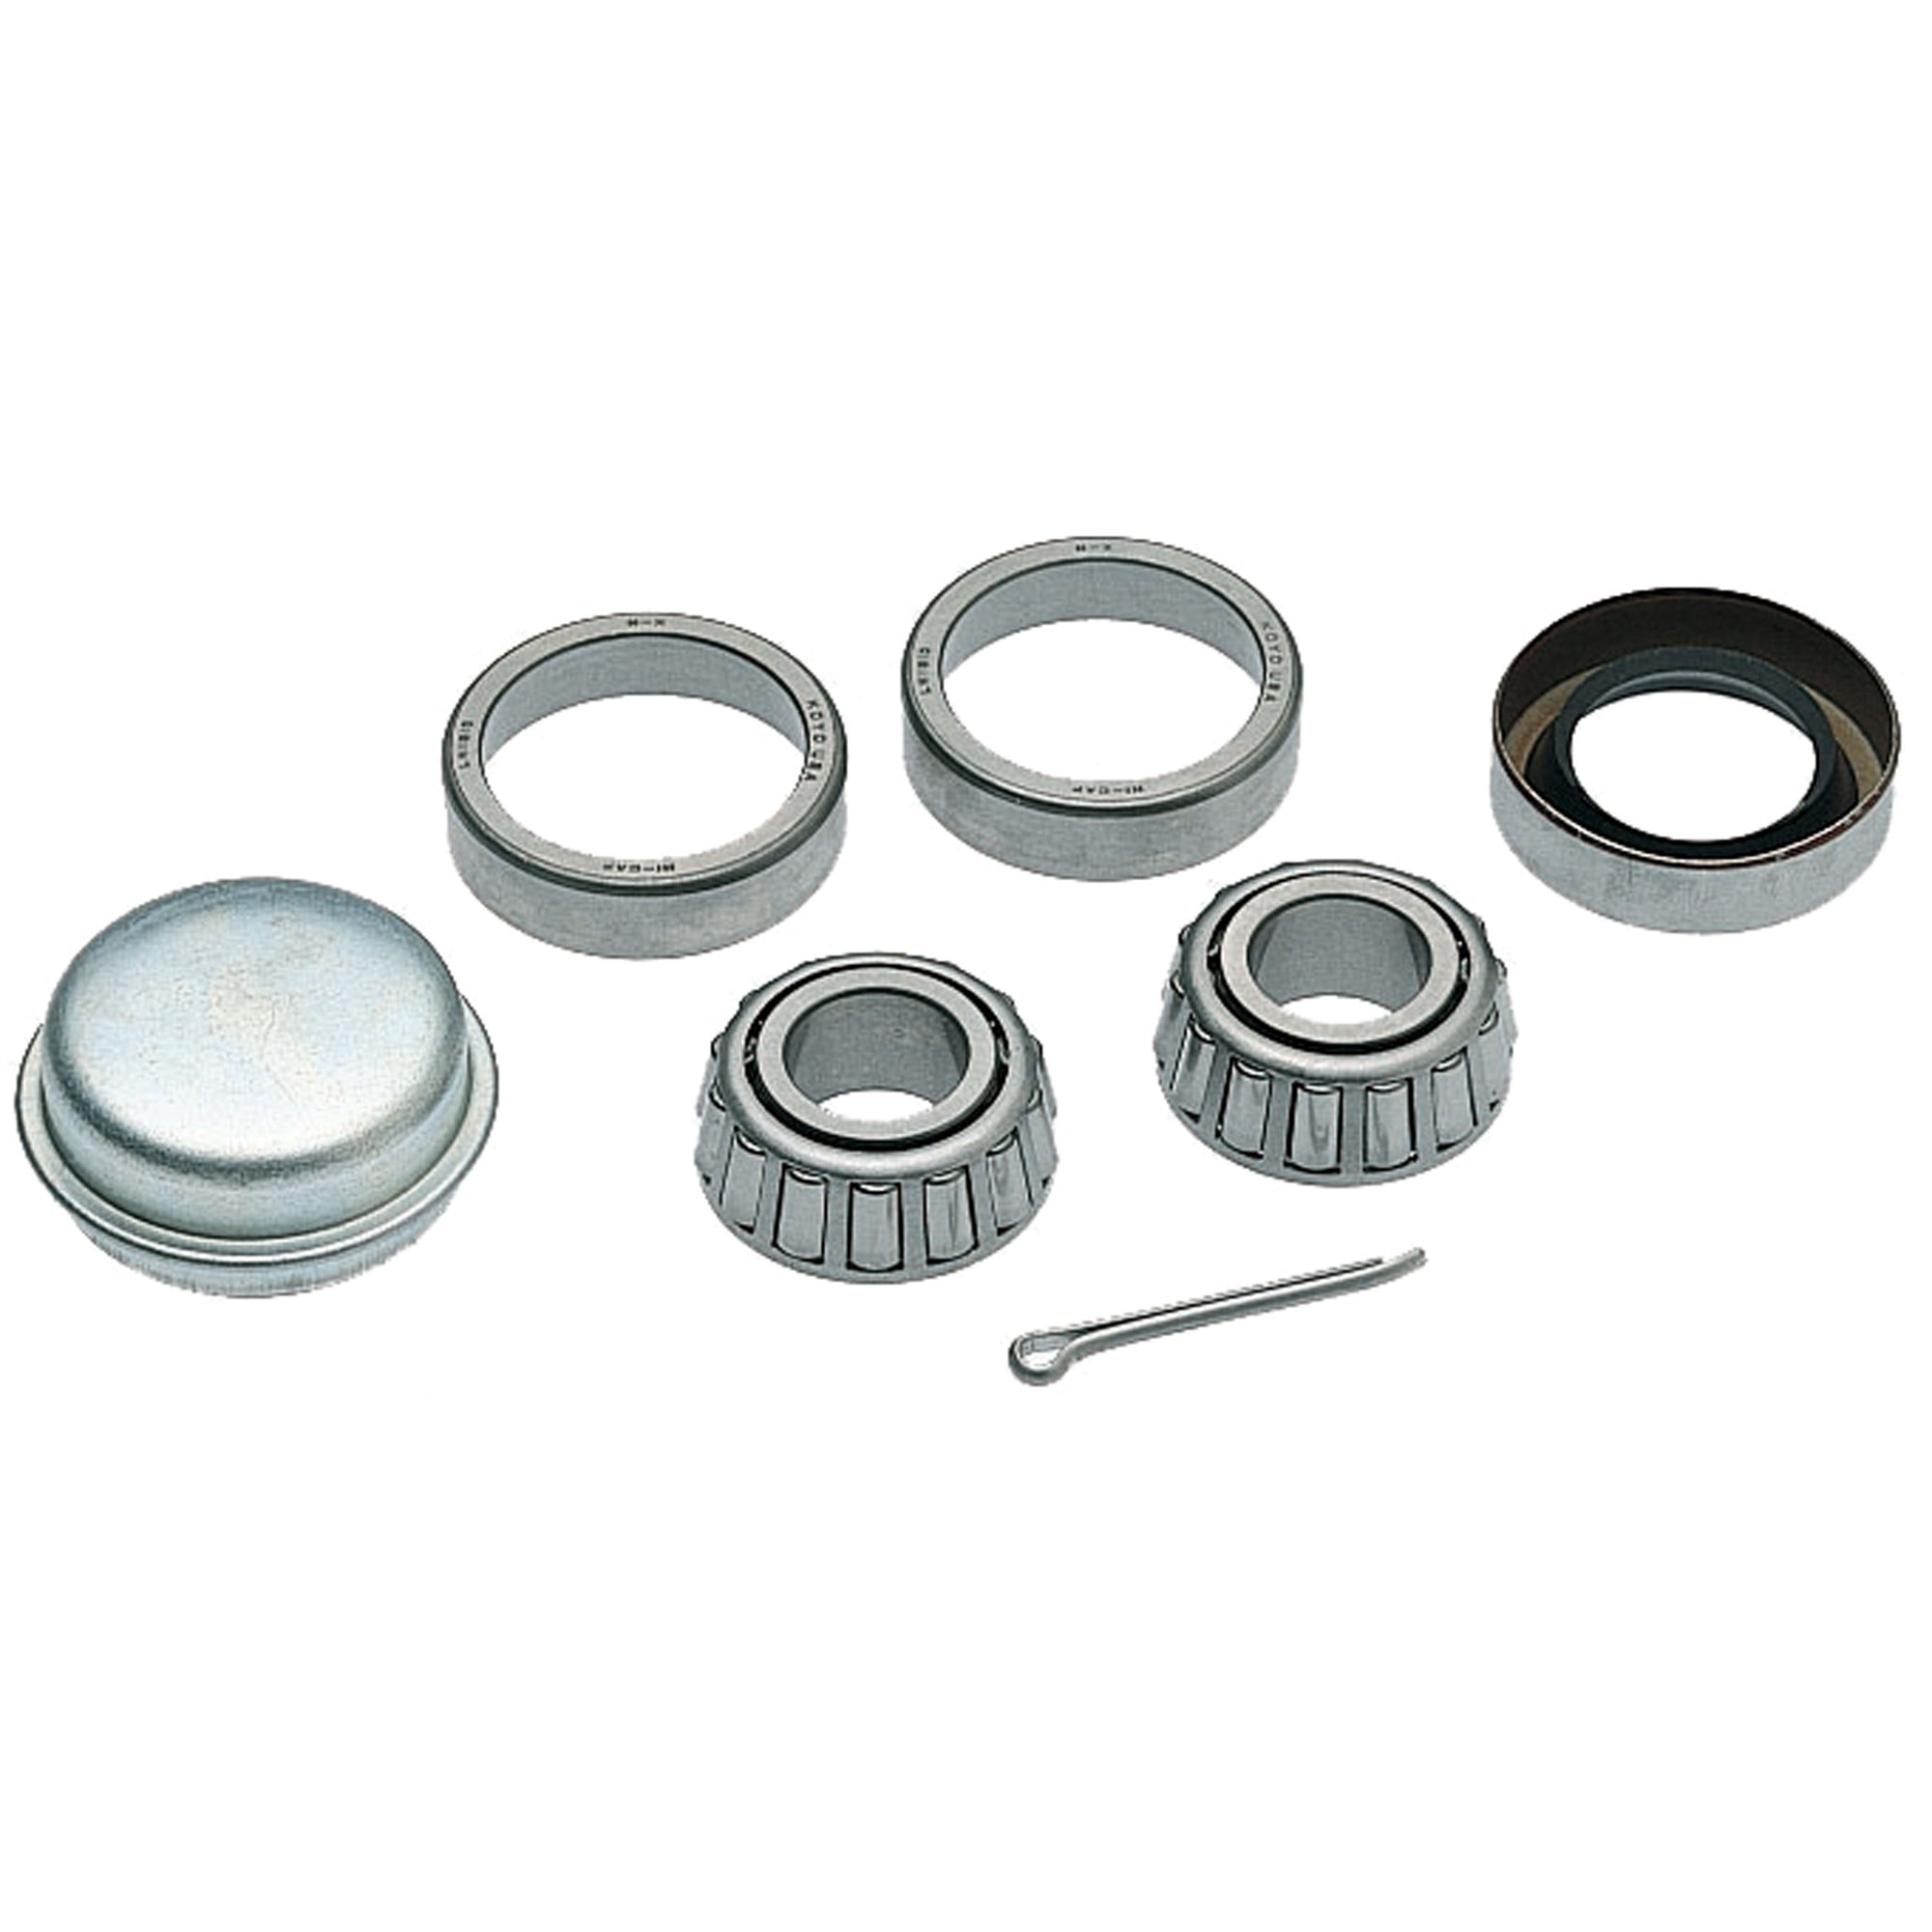 Dutton-Lainson 21775 6500 Series Bearing Set - 3/4 in. Spindle, 1.781 Outer Hub